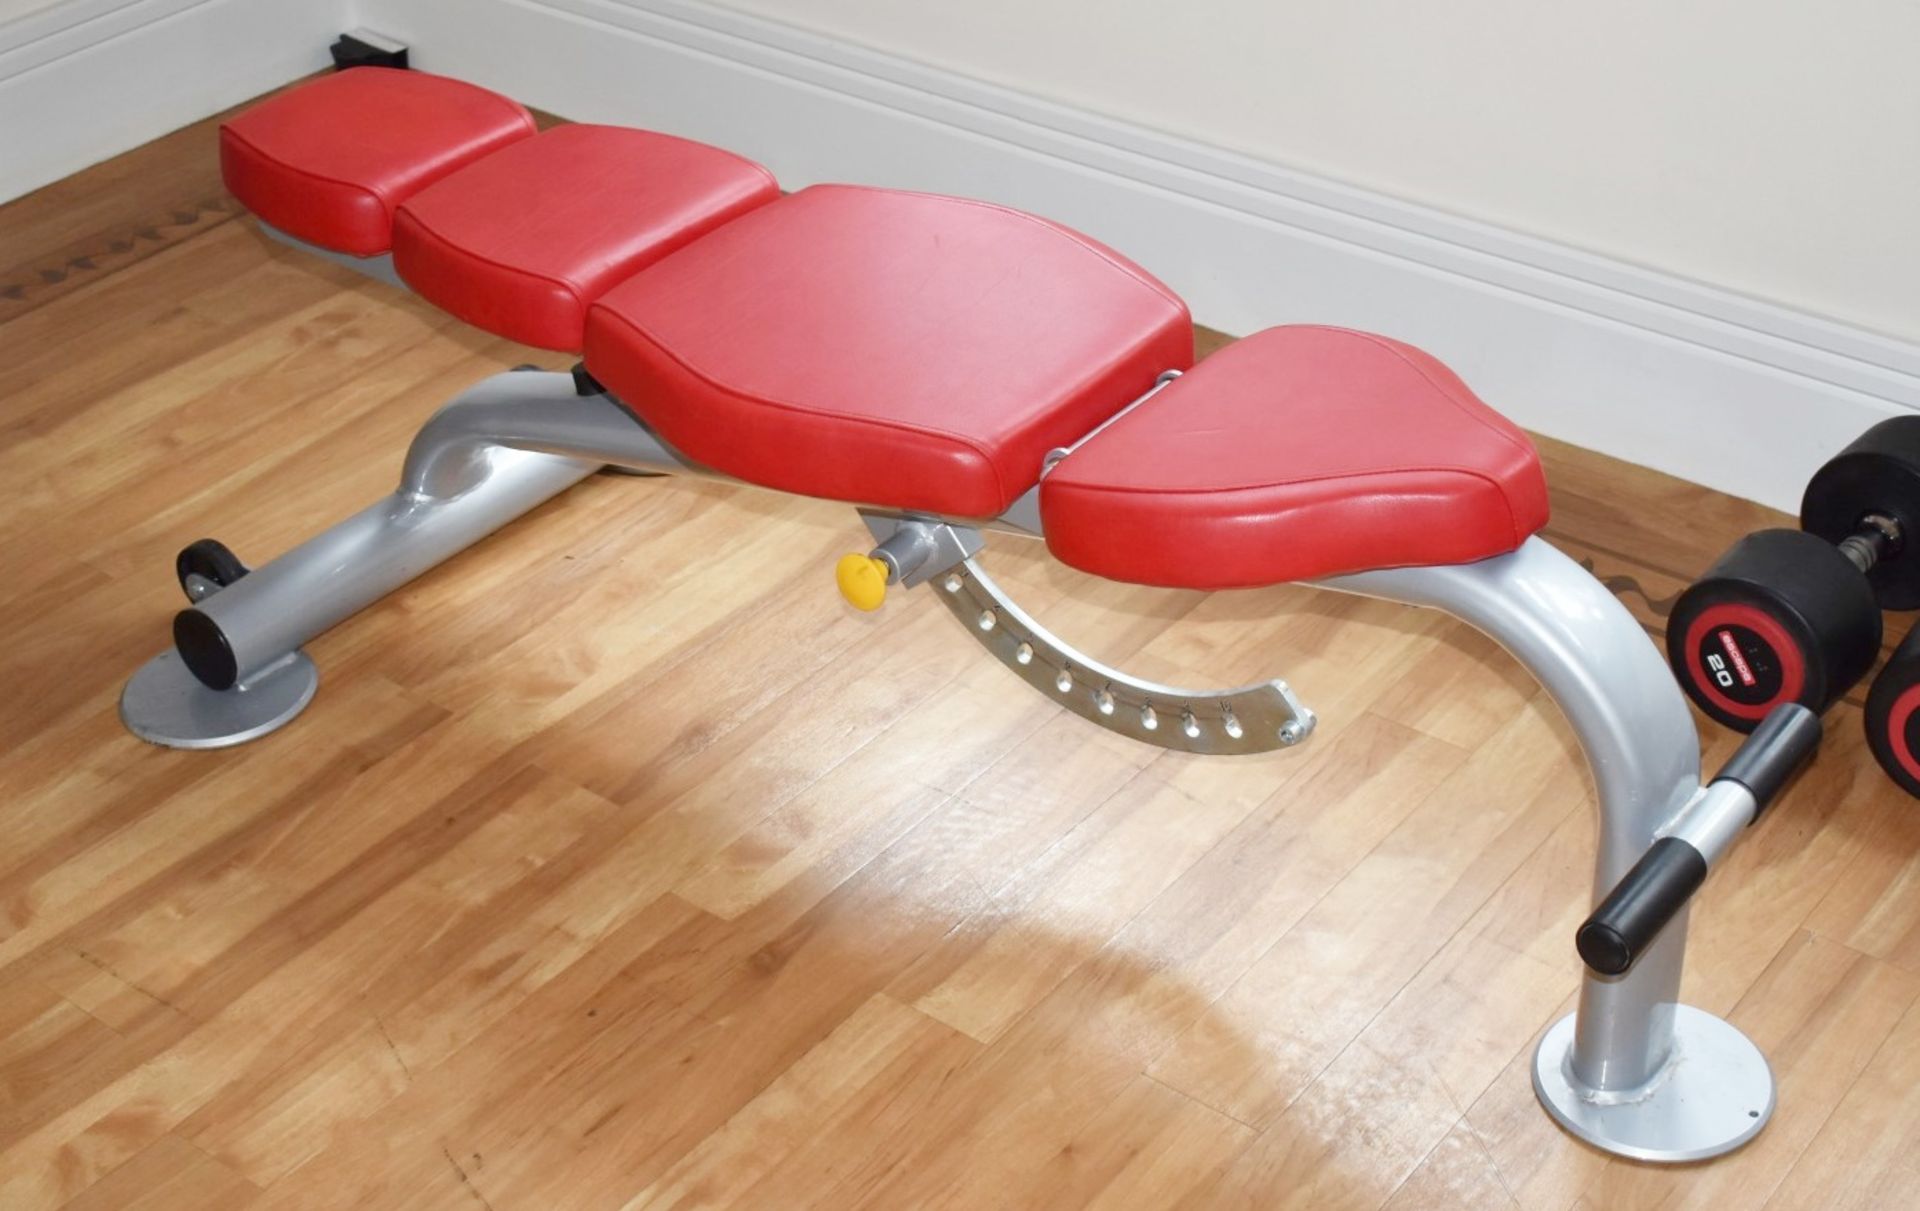 1 x Escape Fitness Adjustable Gym Bench - CL546 - Location: Hale, Cheshire - NO VAT ON THE HAMMER!